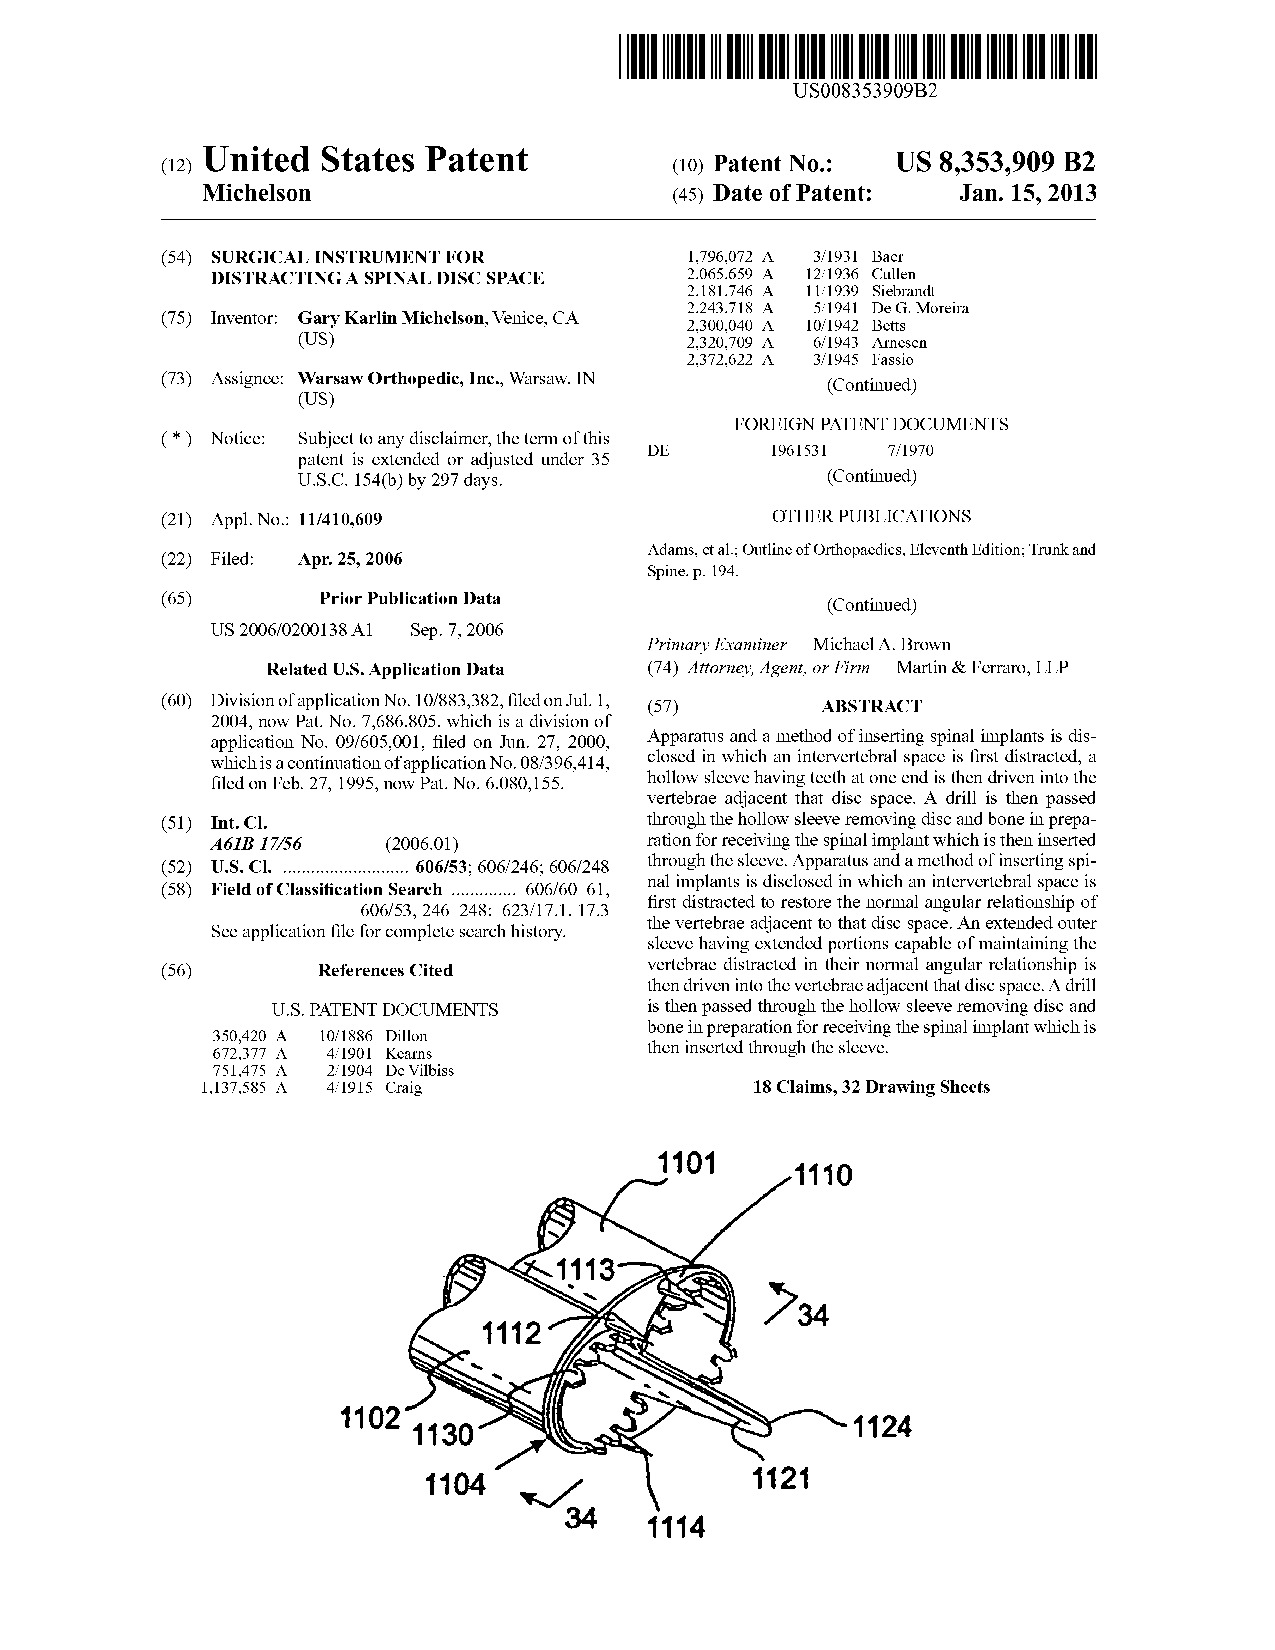 Surgical instrument for distracting a spinal disc space - Patent 8,353,909